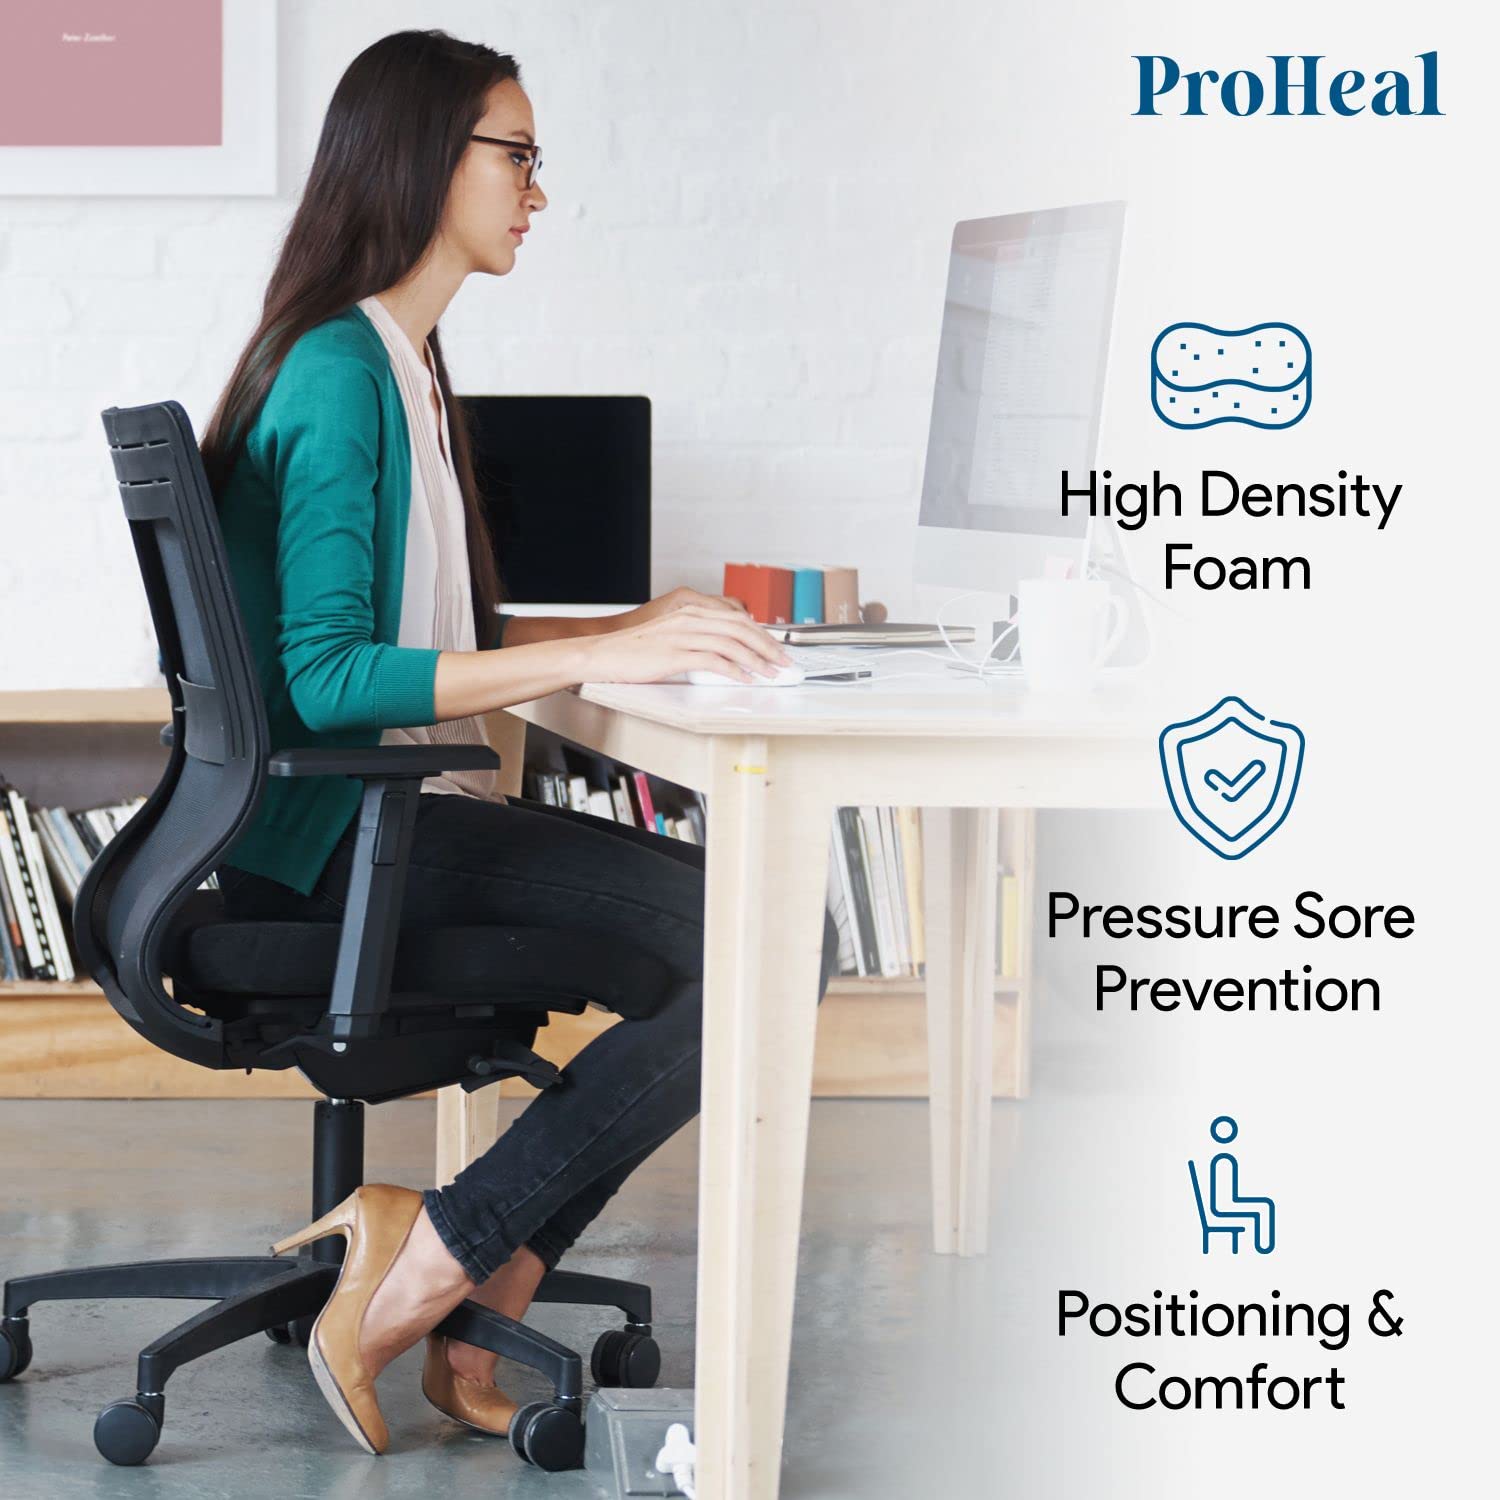 ProHeal Foam Wheelchair Cushion - Comfort and Pressure Relief Seat Cushion for Office Chair - Prevents and Treats Pressure Sores - Breathable and Fluid Resistant Stretch Nylon Cover  - Like New